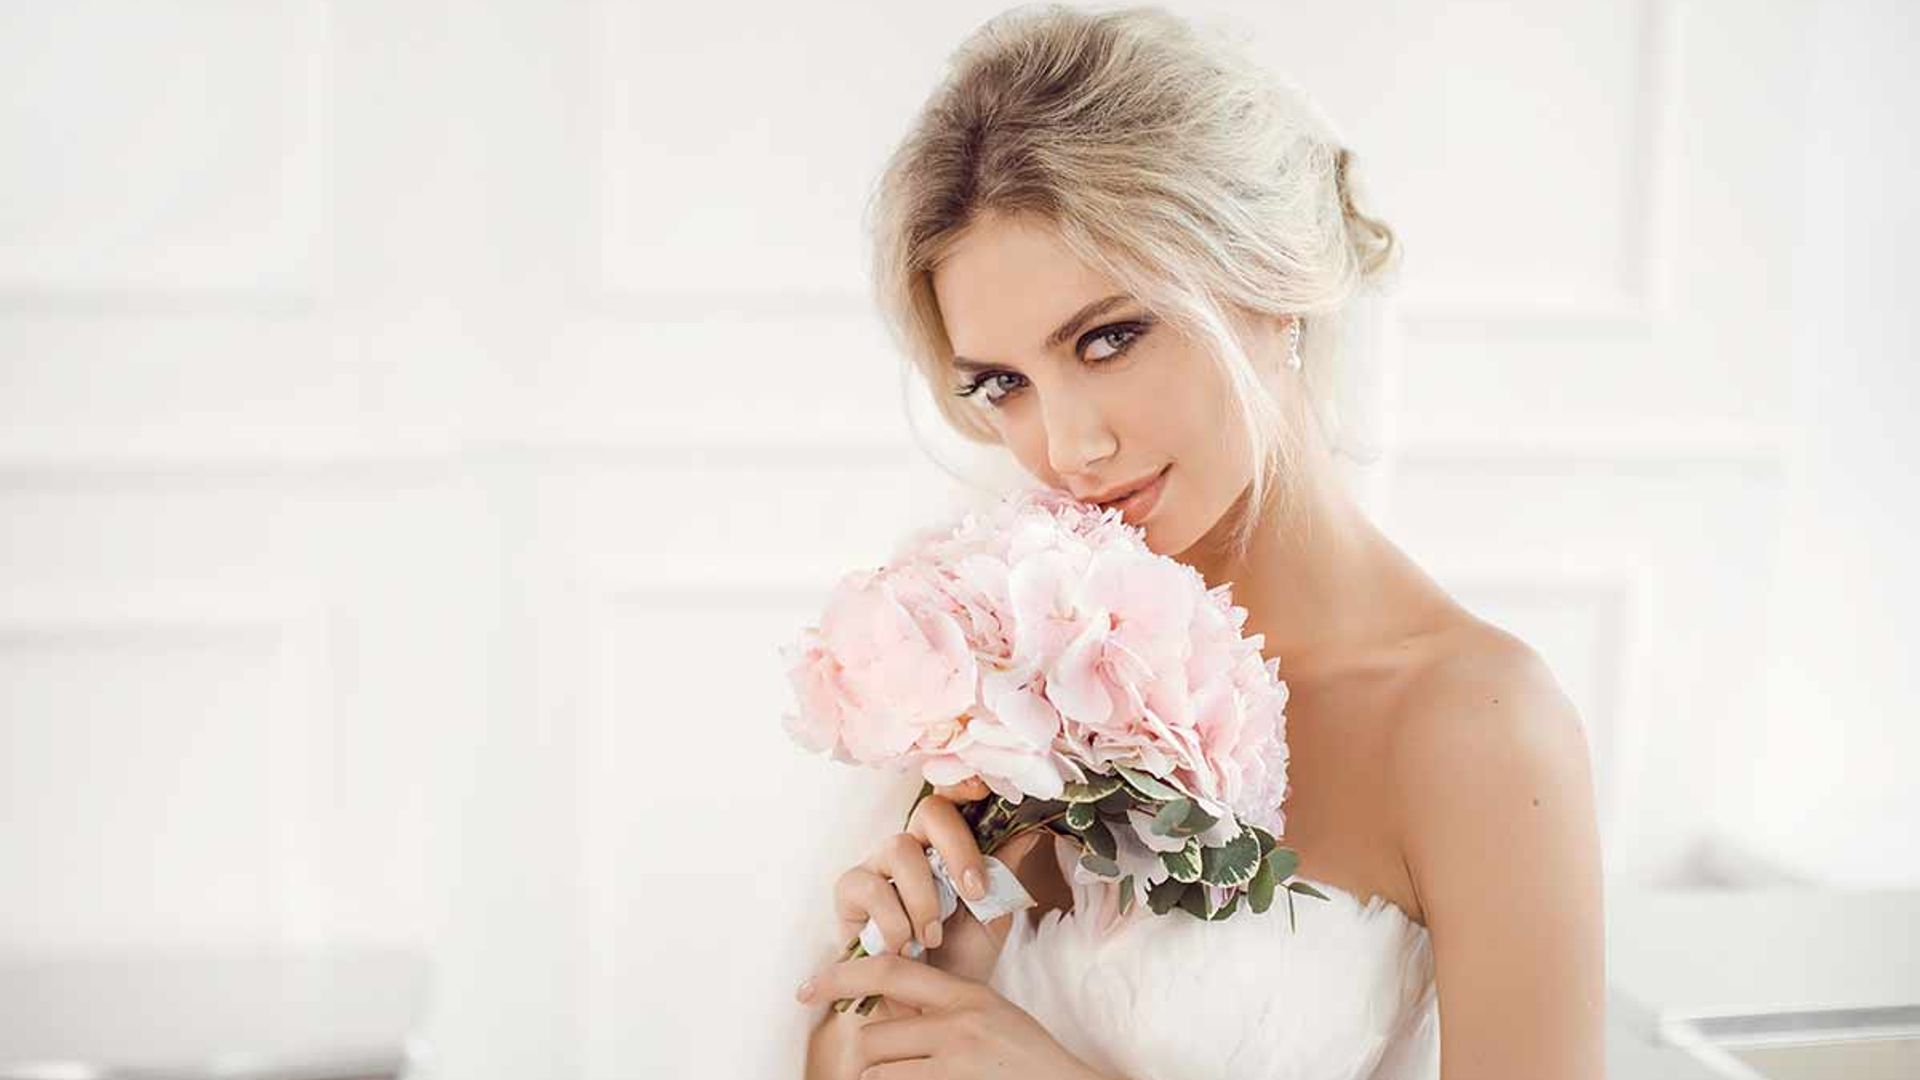 How to prepare your wedding day hair – 6 expert tips you need to know